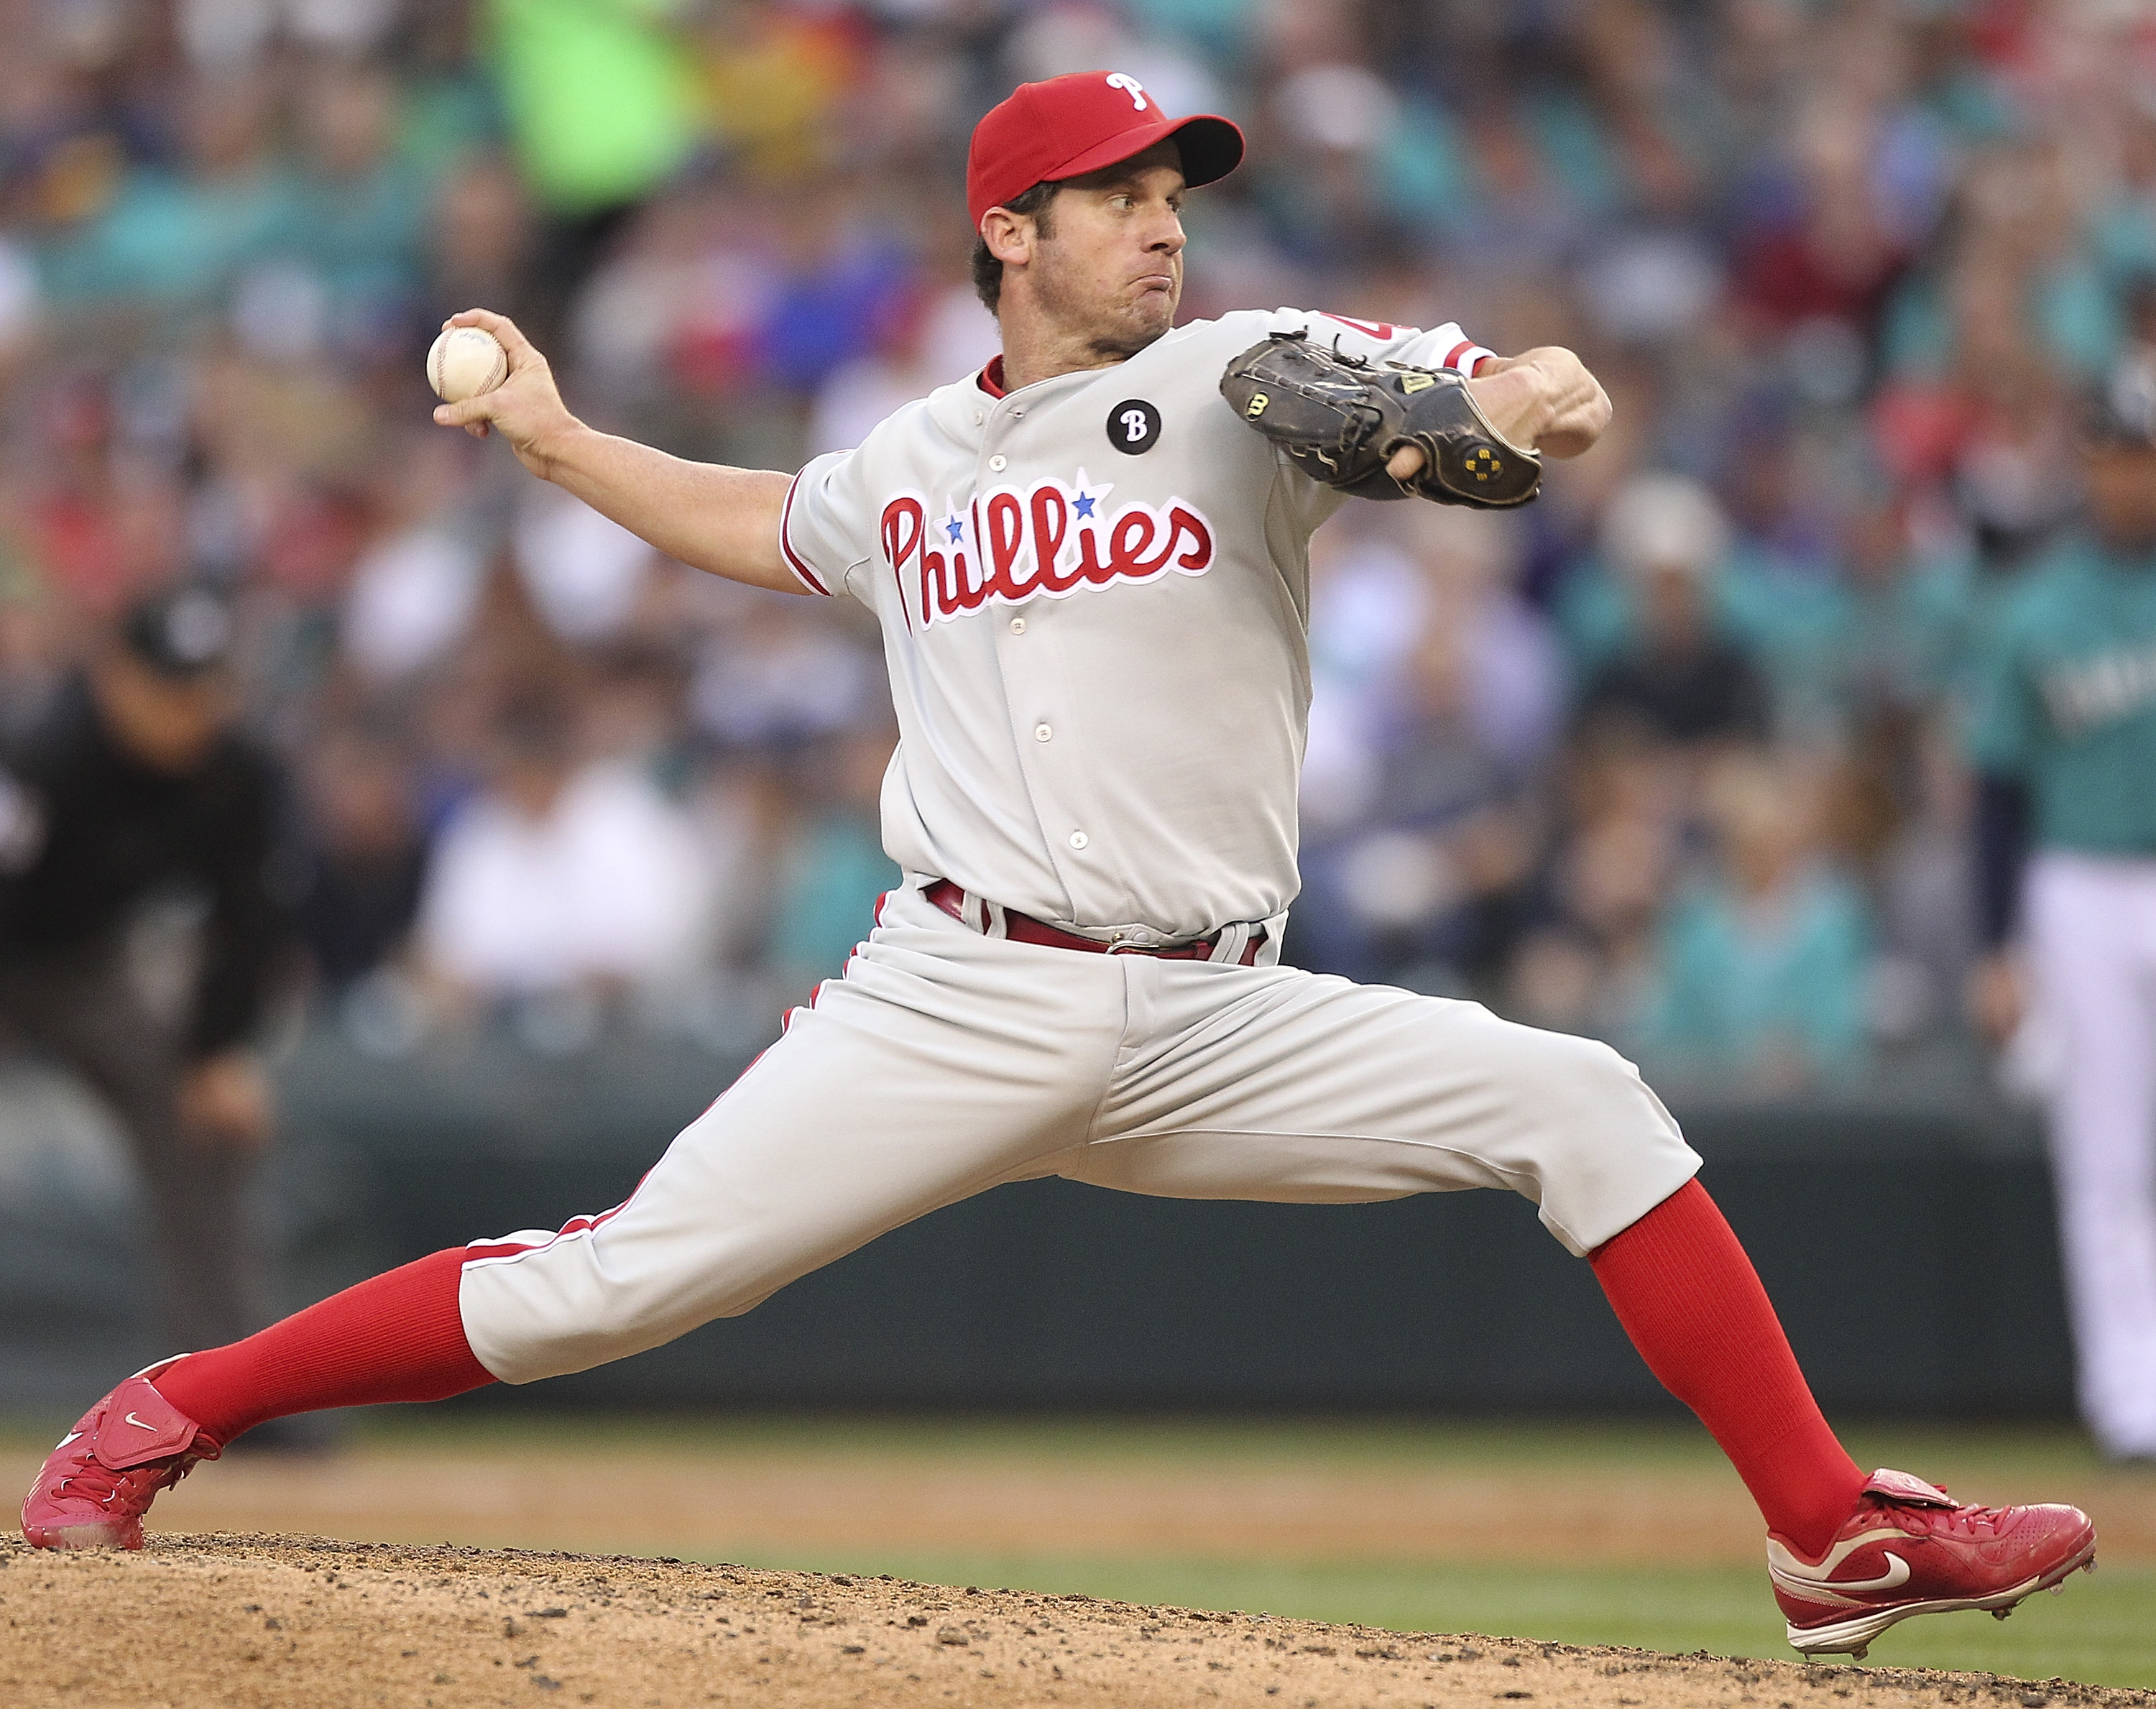 The Yankees, Phillies, Cliff Lee, and Roy Oswalt and how Ruben Amaro is  Smarter than Brian Cashman - sportstalkphilly - News, rumors, game coverage  of the Philadelphia Eagles, Philadelphia Phillies, Philadelphia Flyers